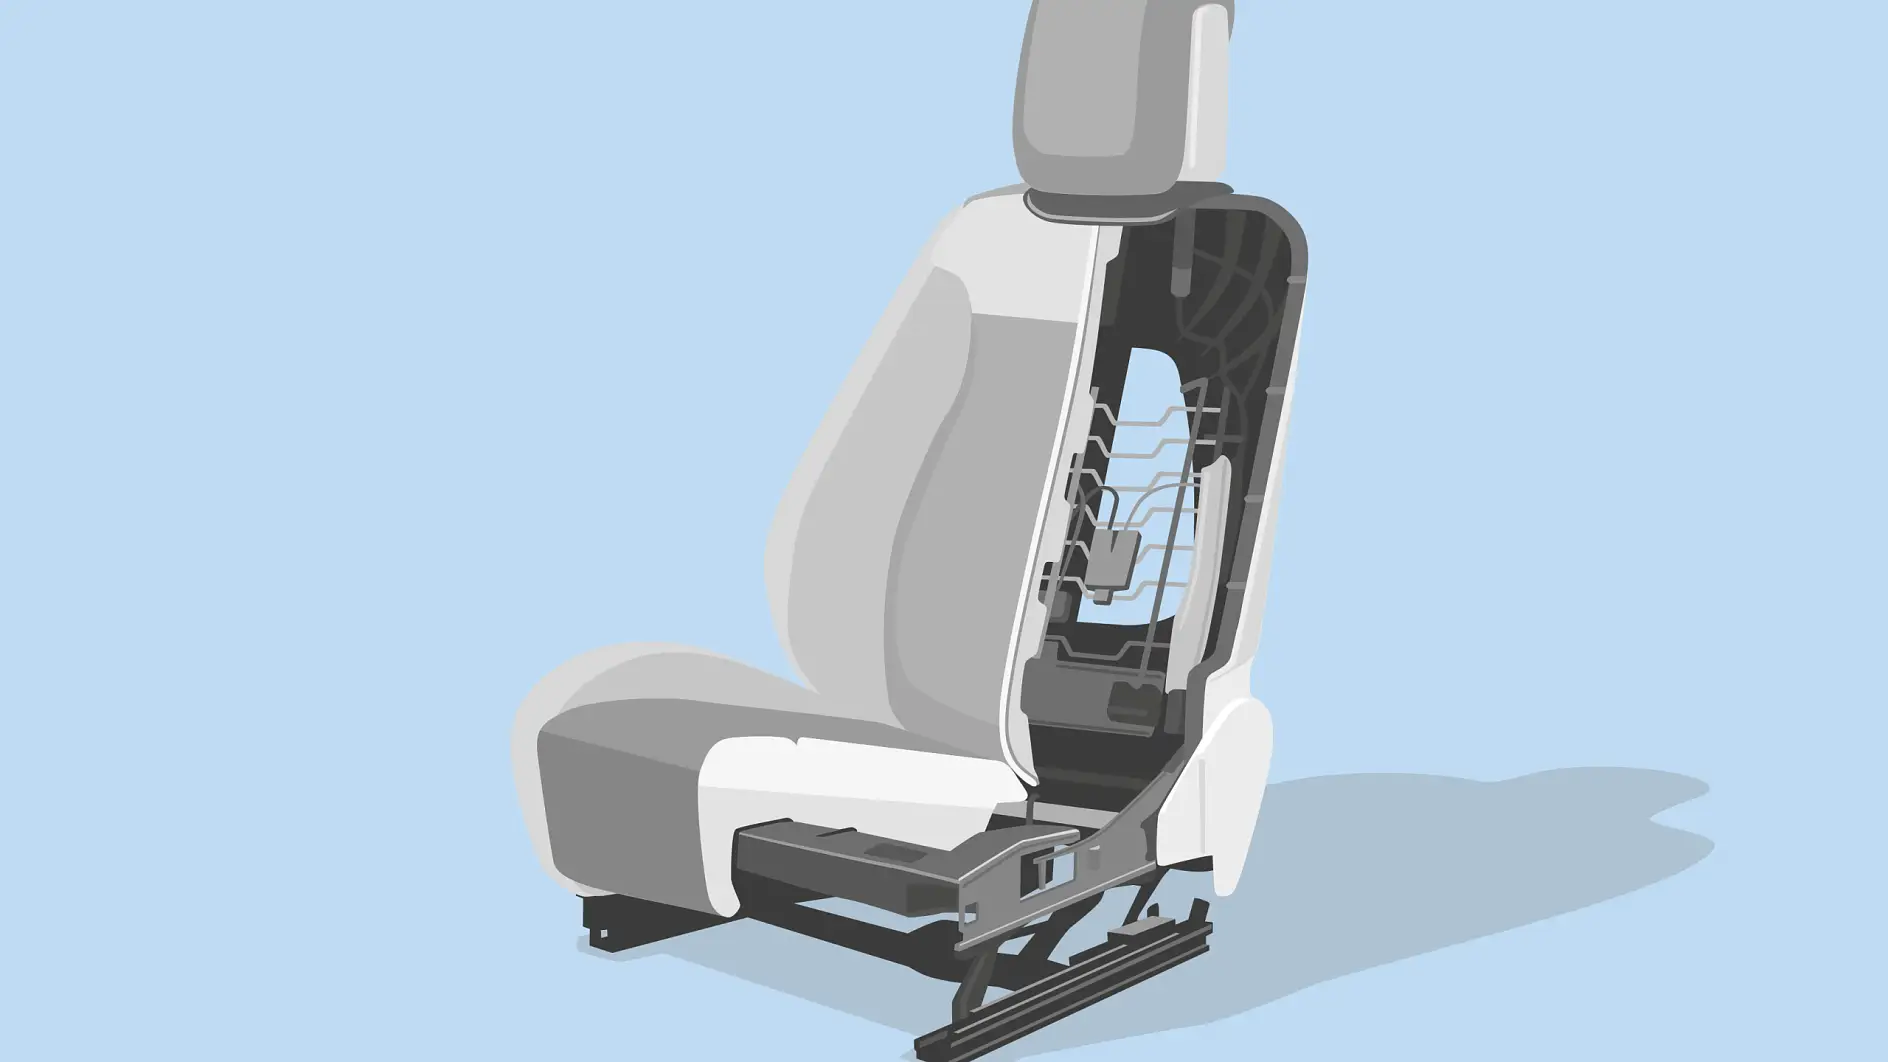 Seat application for the automotive industry